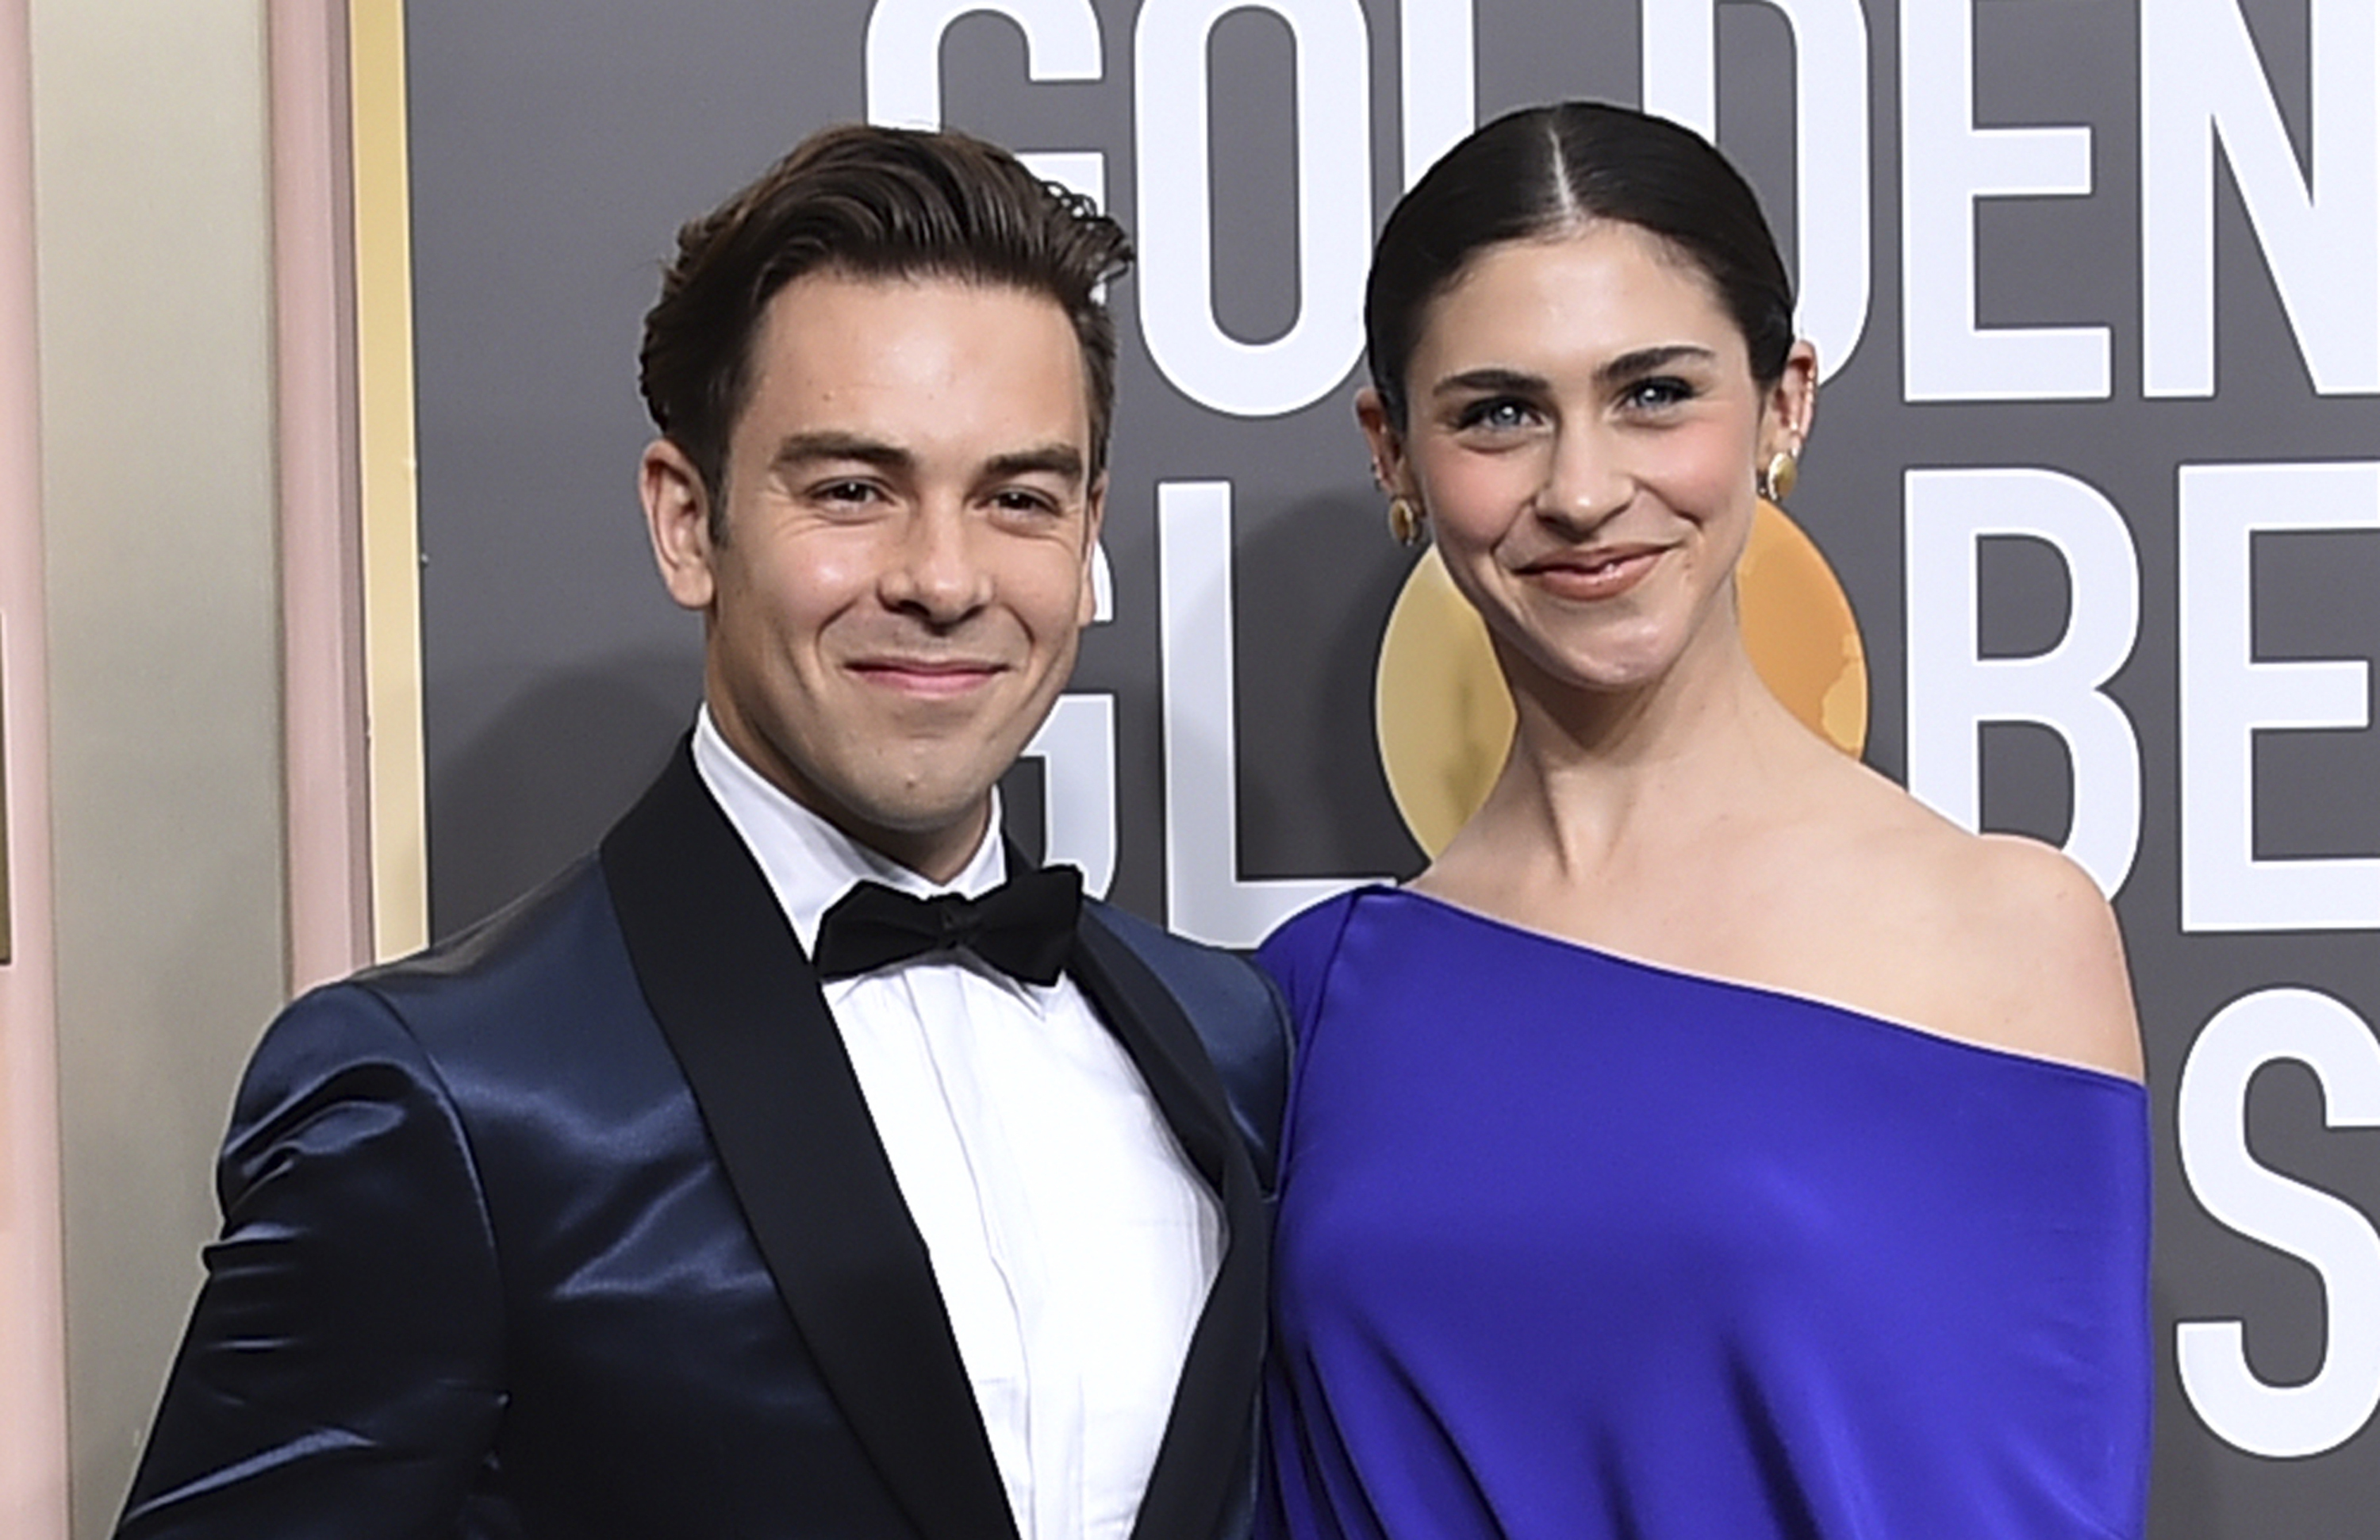 Cody Ko, left, and Kelsey Kreppel arrive at the 80th annual Golden Globe Awards at the Beverly Hilton Hotel on Tuesday, Jan. 10, 2023, in Beverly Hills, Calif. (Photo by Jordan Strauss/Invision/AP)